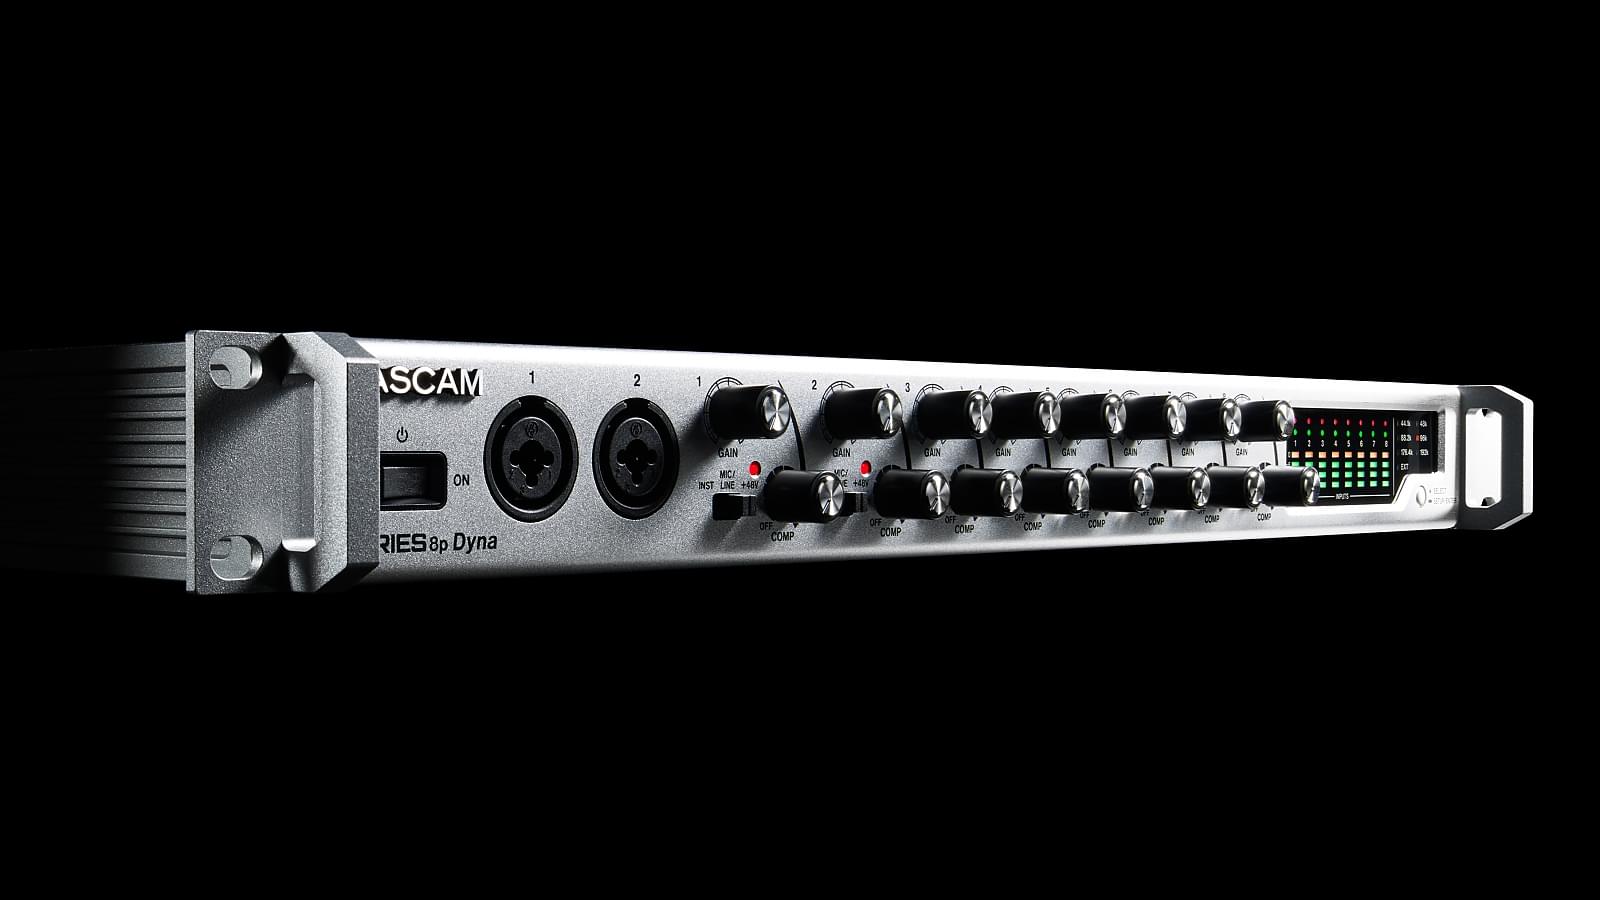 Tascam SERIES 8p Dyna | 8-Channel A/D Converter and Mic Preamp With  Analogue Compressor